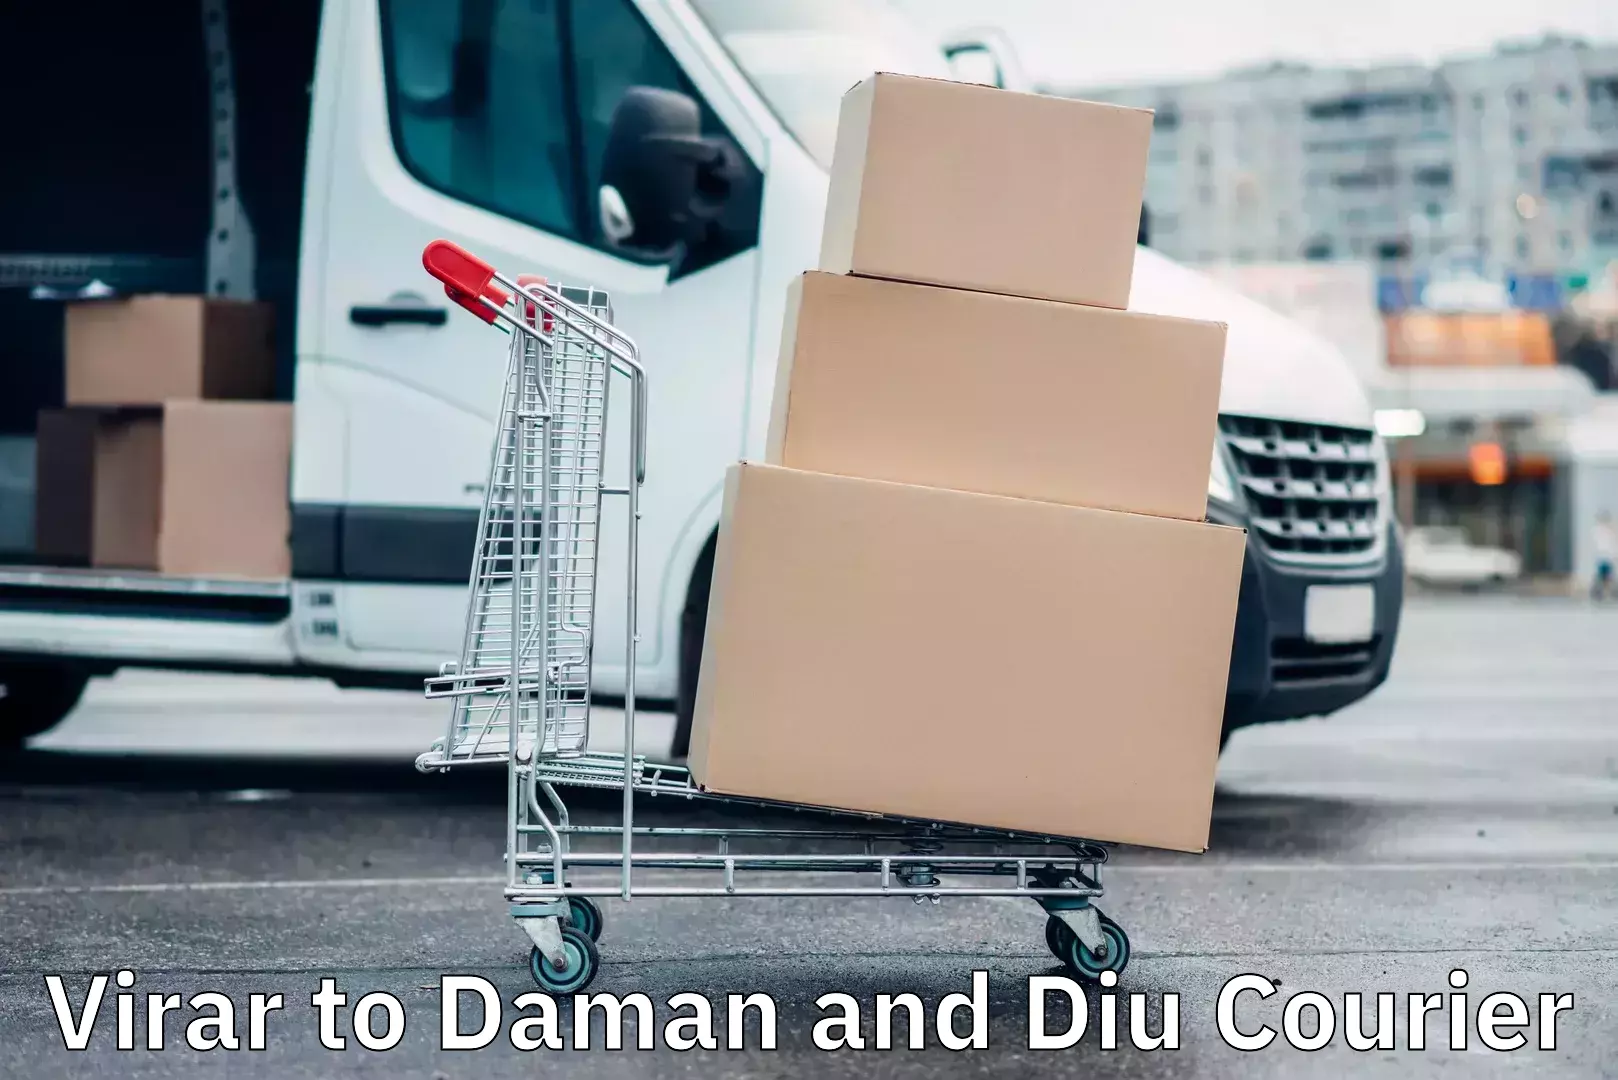 Reliable parcel services Virar to Daman and Diu